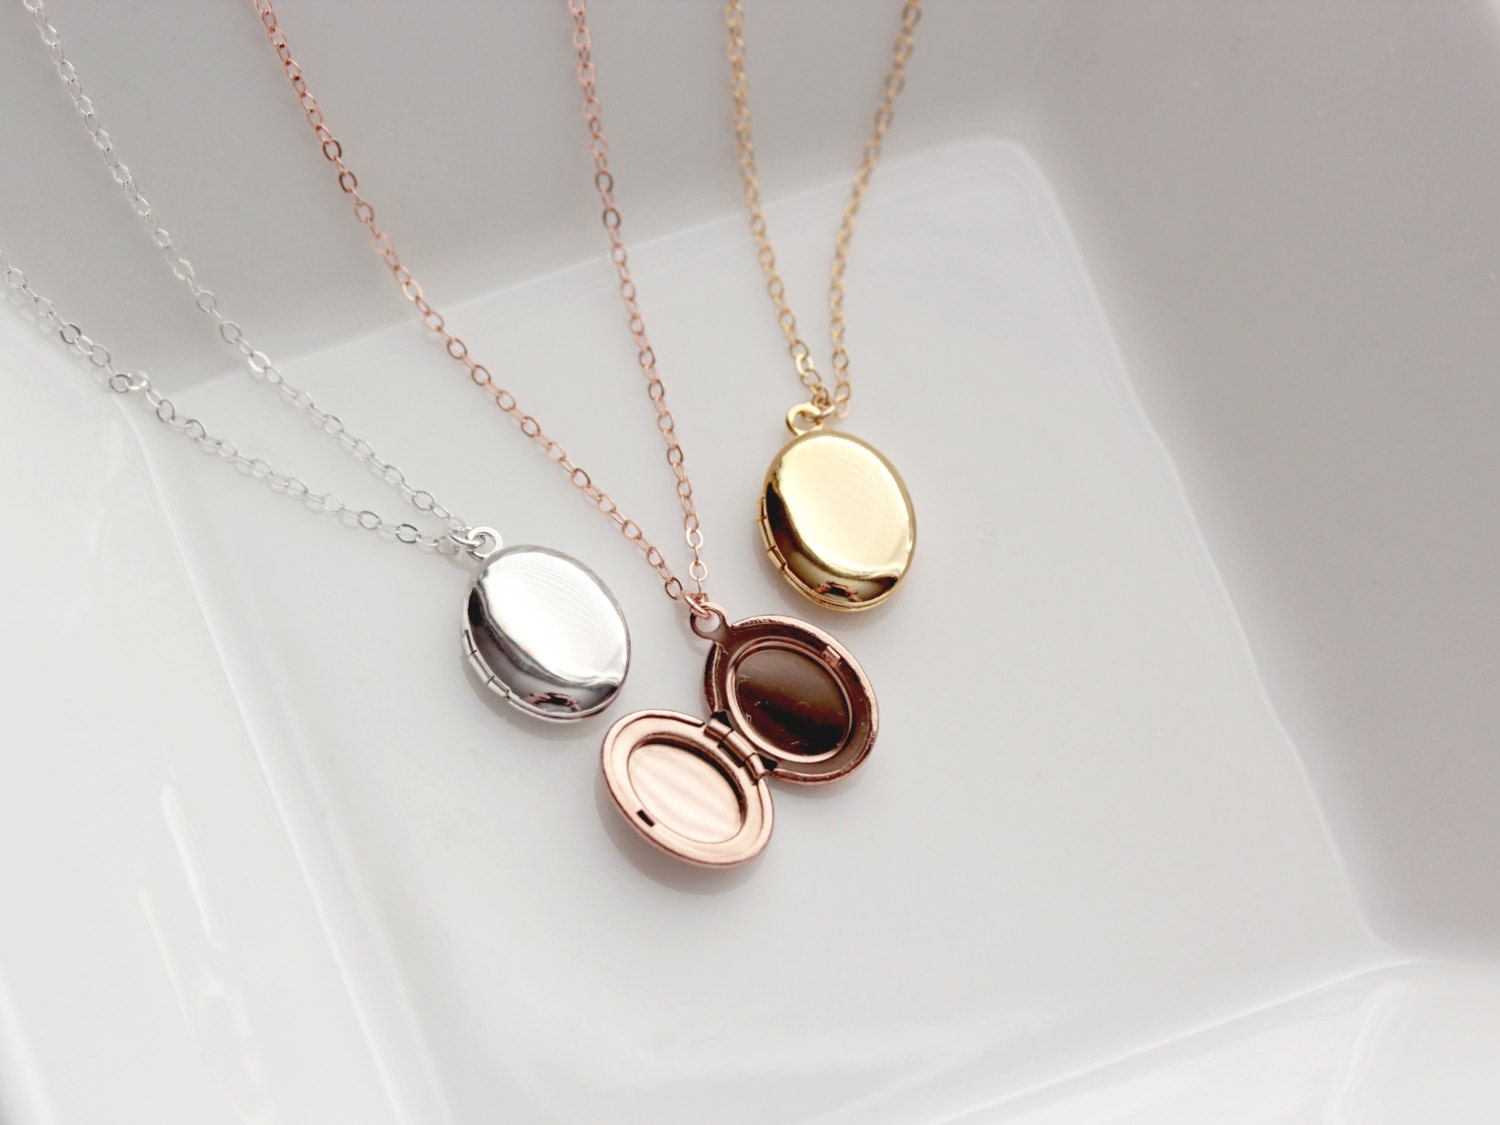 Openable Love Heart Small Heart Locket Necklace For Women Gold, Silver, And  Rose Stainless Steel Pendants With Polished Finish Perfect For Photos And  Jewelry Storage From Frankie_ngok, $6.33 | DHgate.Com